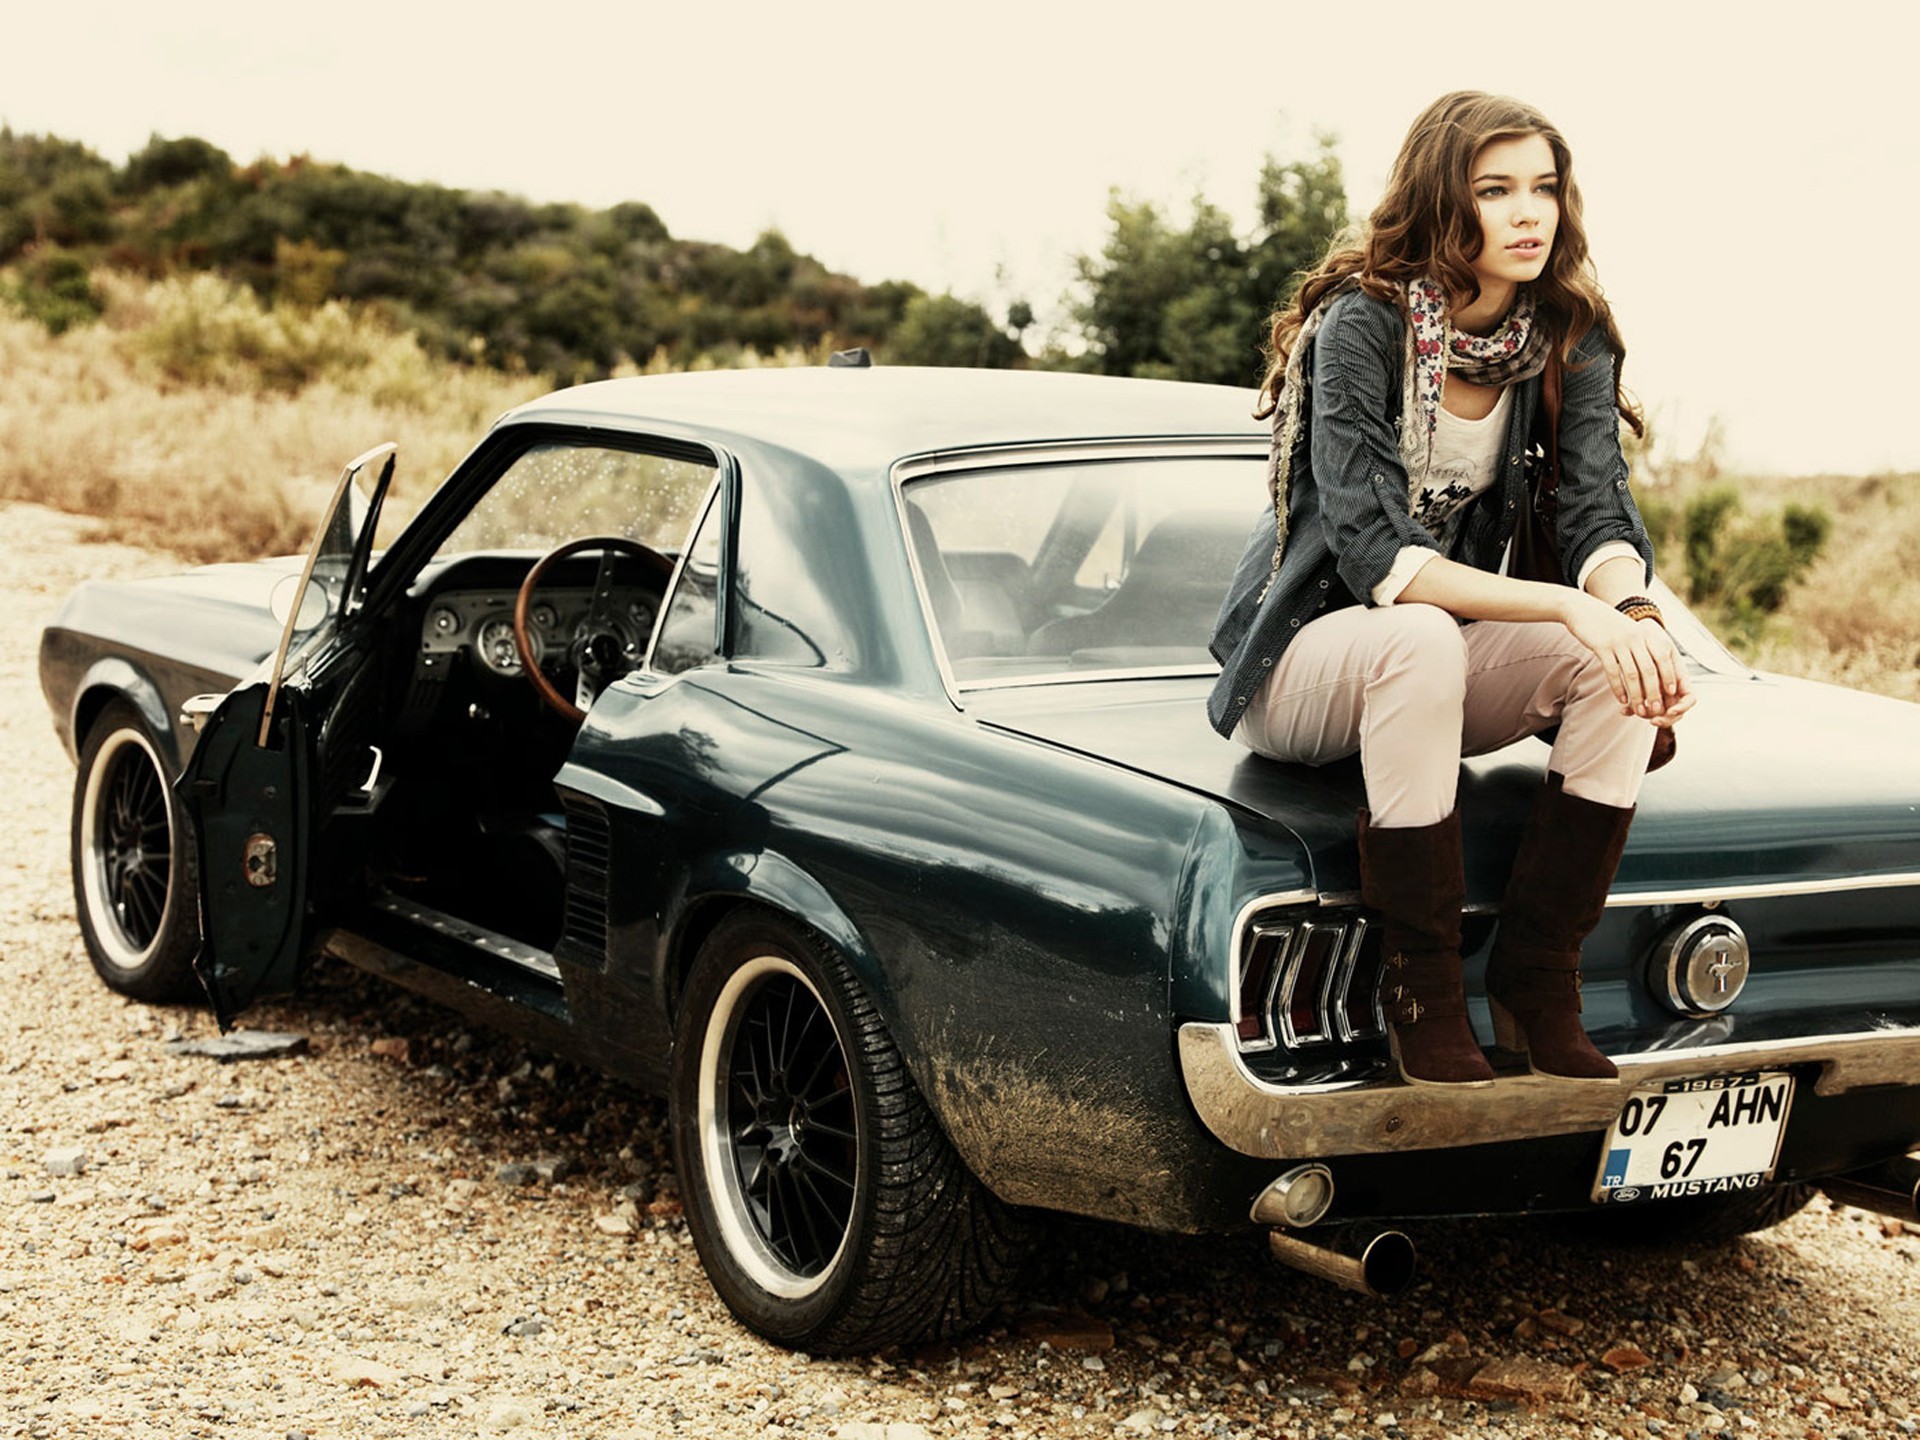 People 1920x1440 Antalya model women brunette car long hair Ford Mustang women with cars vehicle numbers black cars sitting boots women outdoors outdoors muscle cars American cars